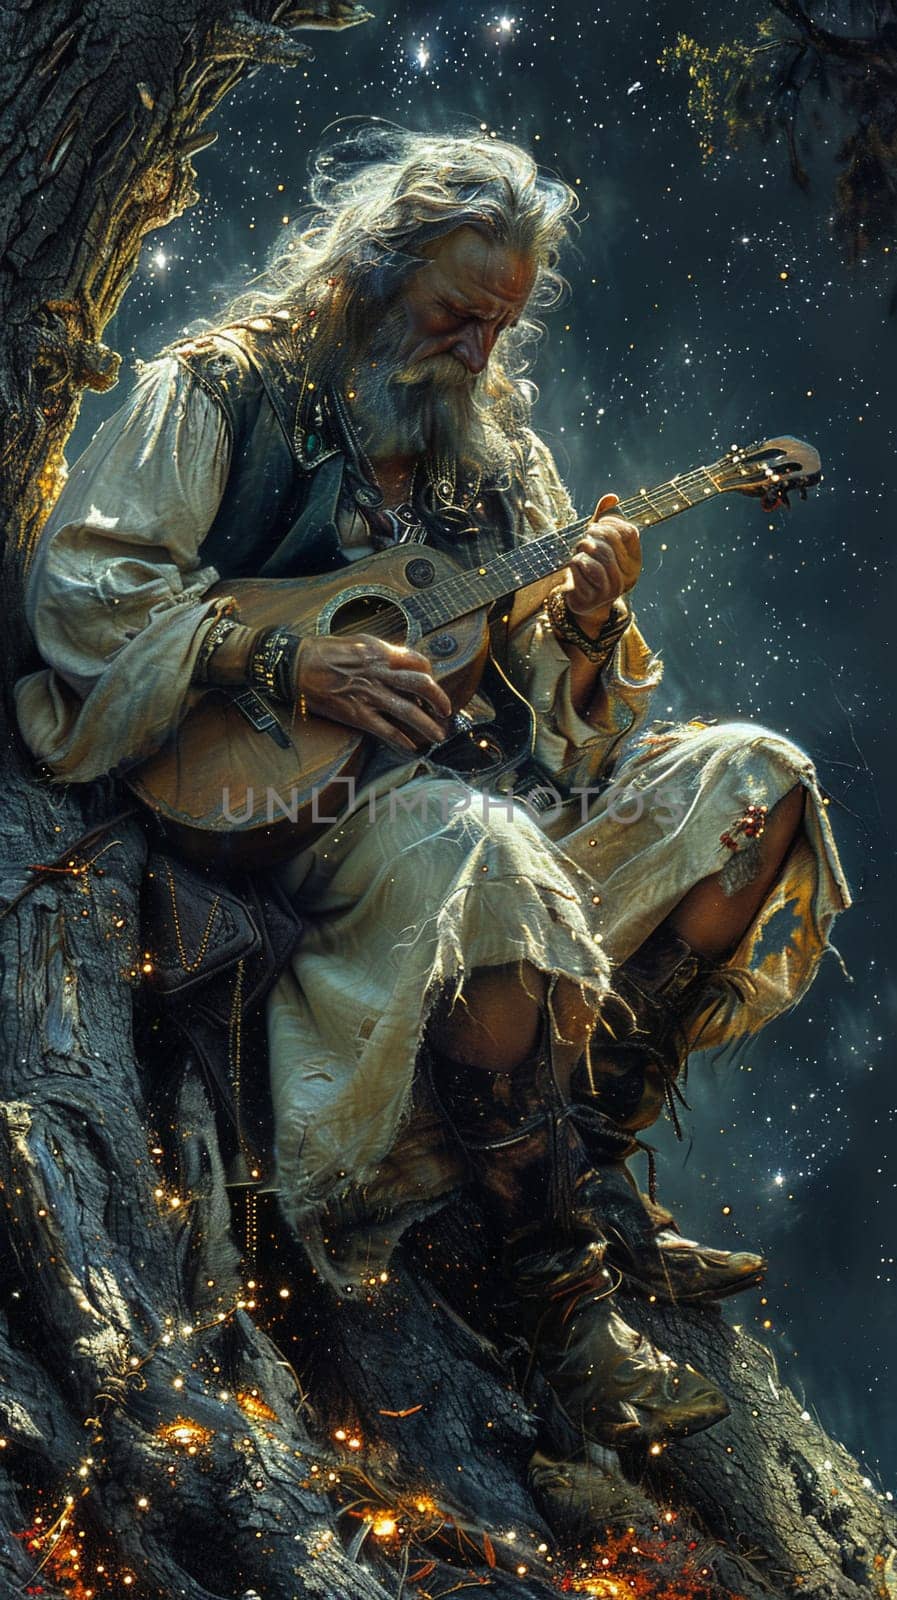 Bard strumming the strings of a starlight lyre, the melody a constellation of sound.